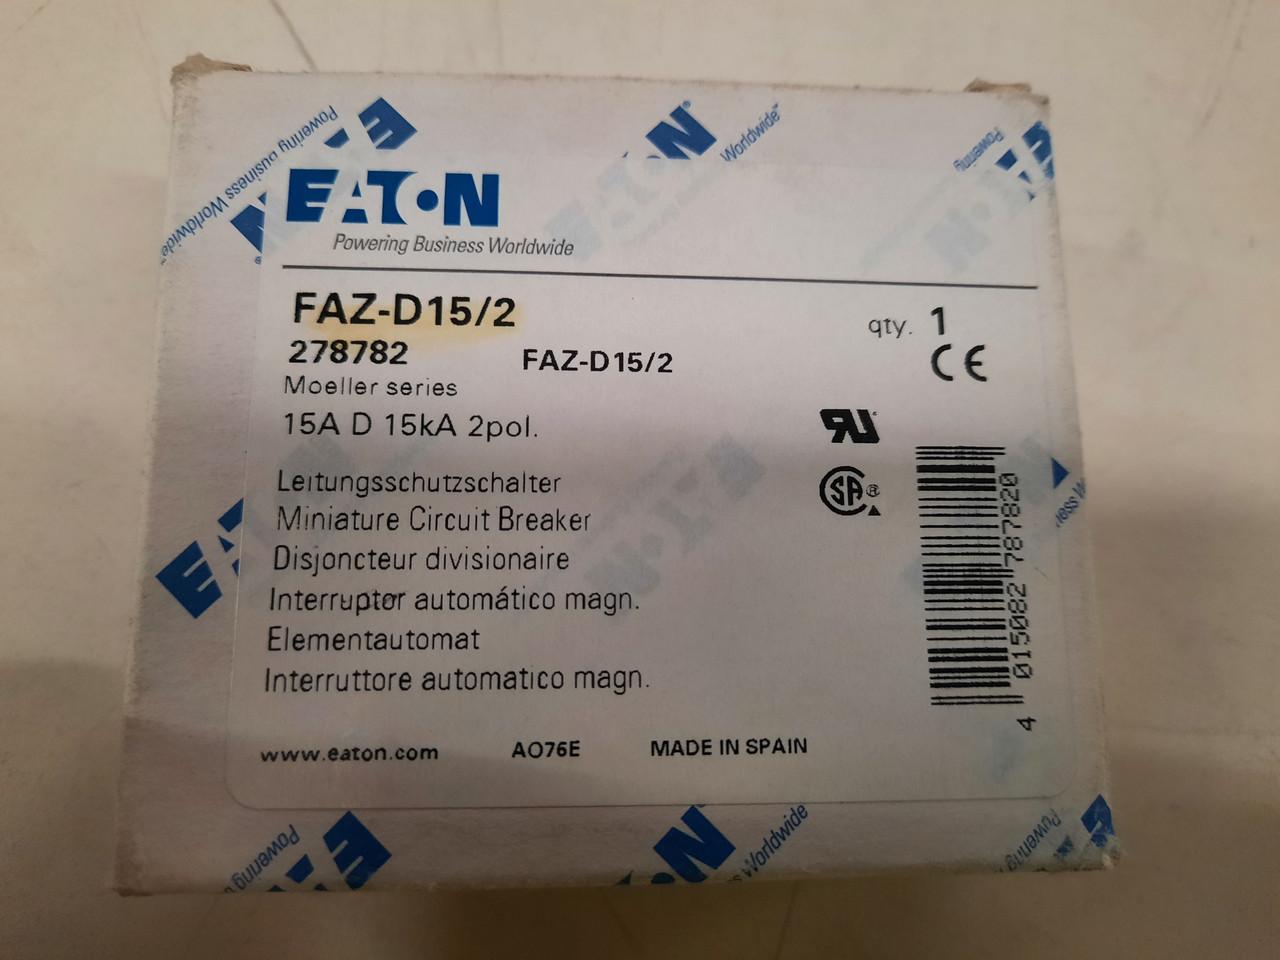 Eaton FAZ-D15/2 Eaton FAZ supplementary protector,UL 1077 Industrial miniature circuit breaker - supplementary protector,High levels of inrush current are expected,15 A,15 kAIC,Two-pole,10-20X /n,50-60 Hz,Standard terminals,D Curve